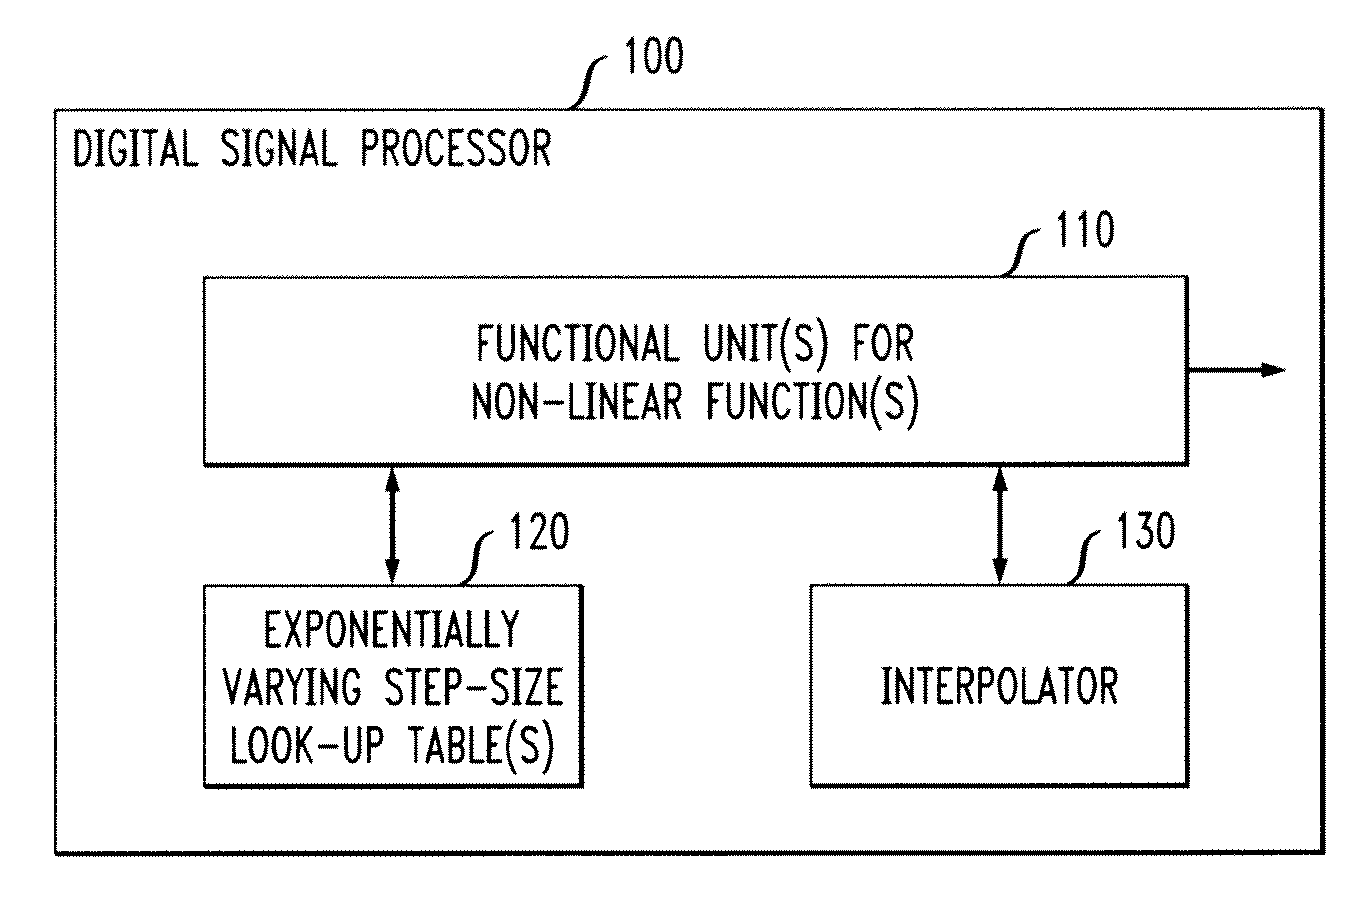 Digital Signal Processor Having Instruction Set With One Or More Non-Linear Functions Using Reduced Look-Up Table With Exponentially Varying Step-Size